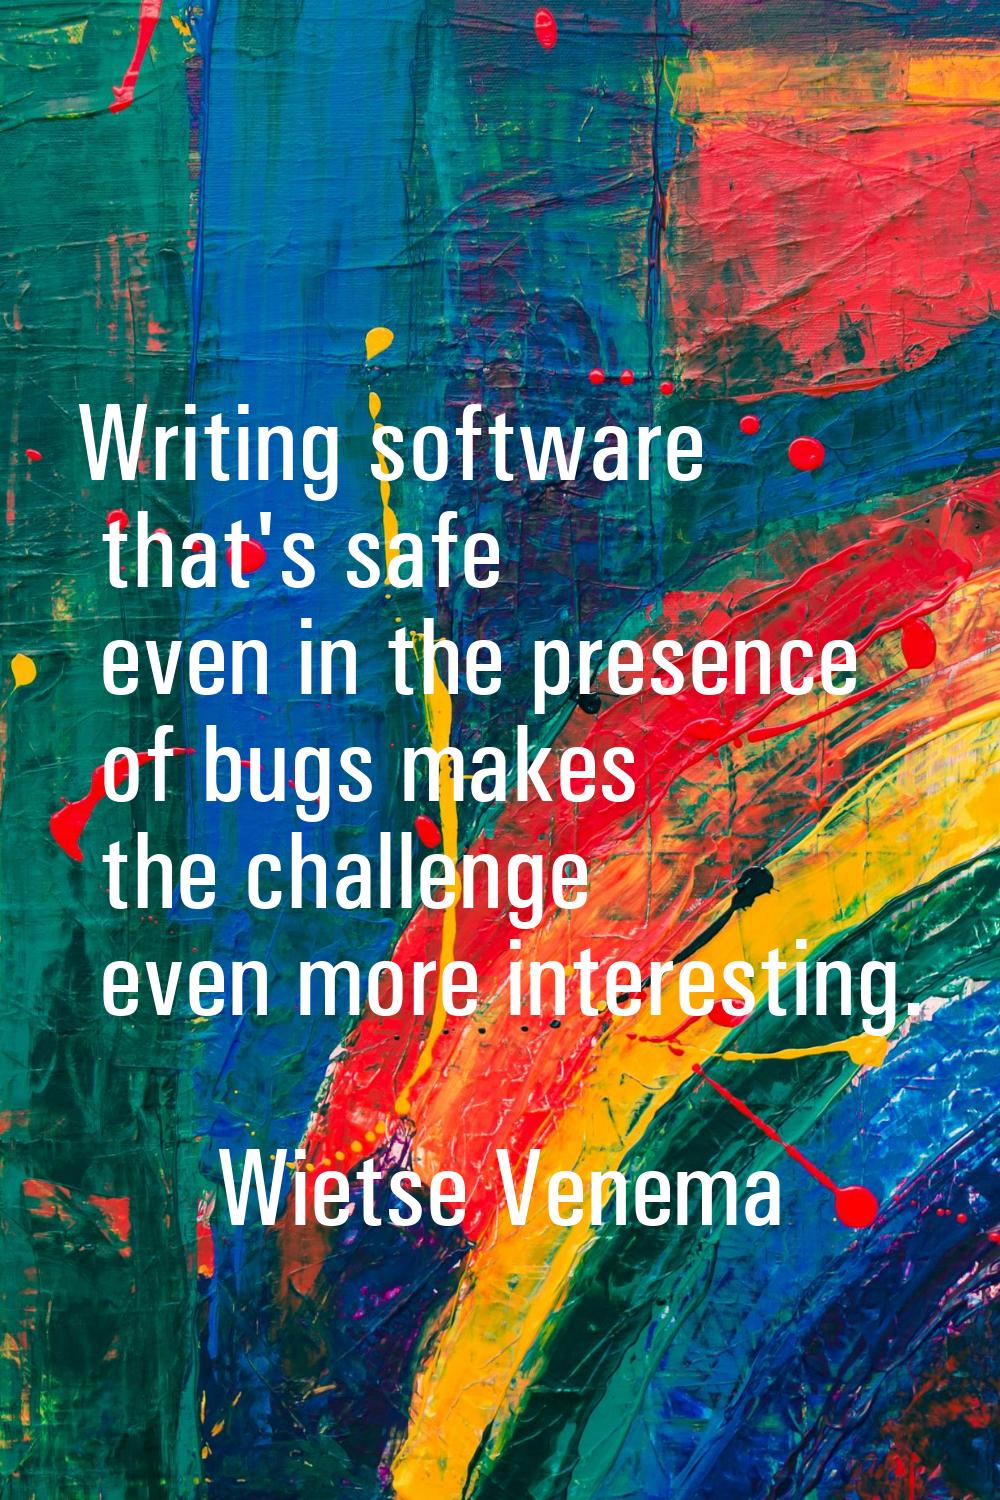 Writing software that's safe even in the presence of bugs makes the challenge even more interesting